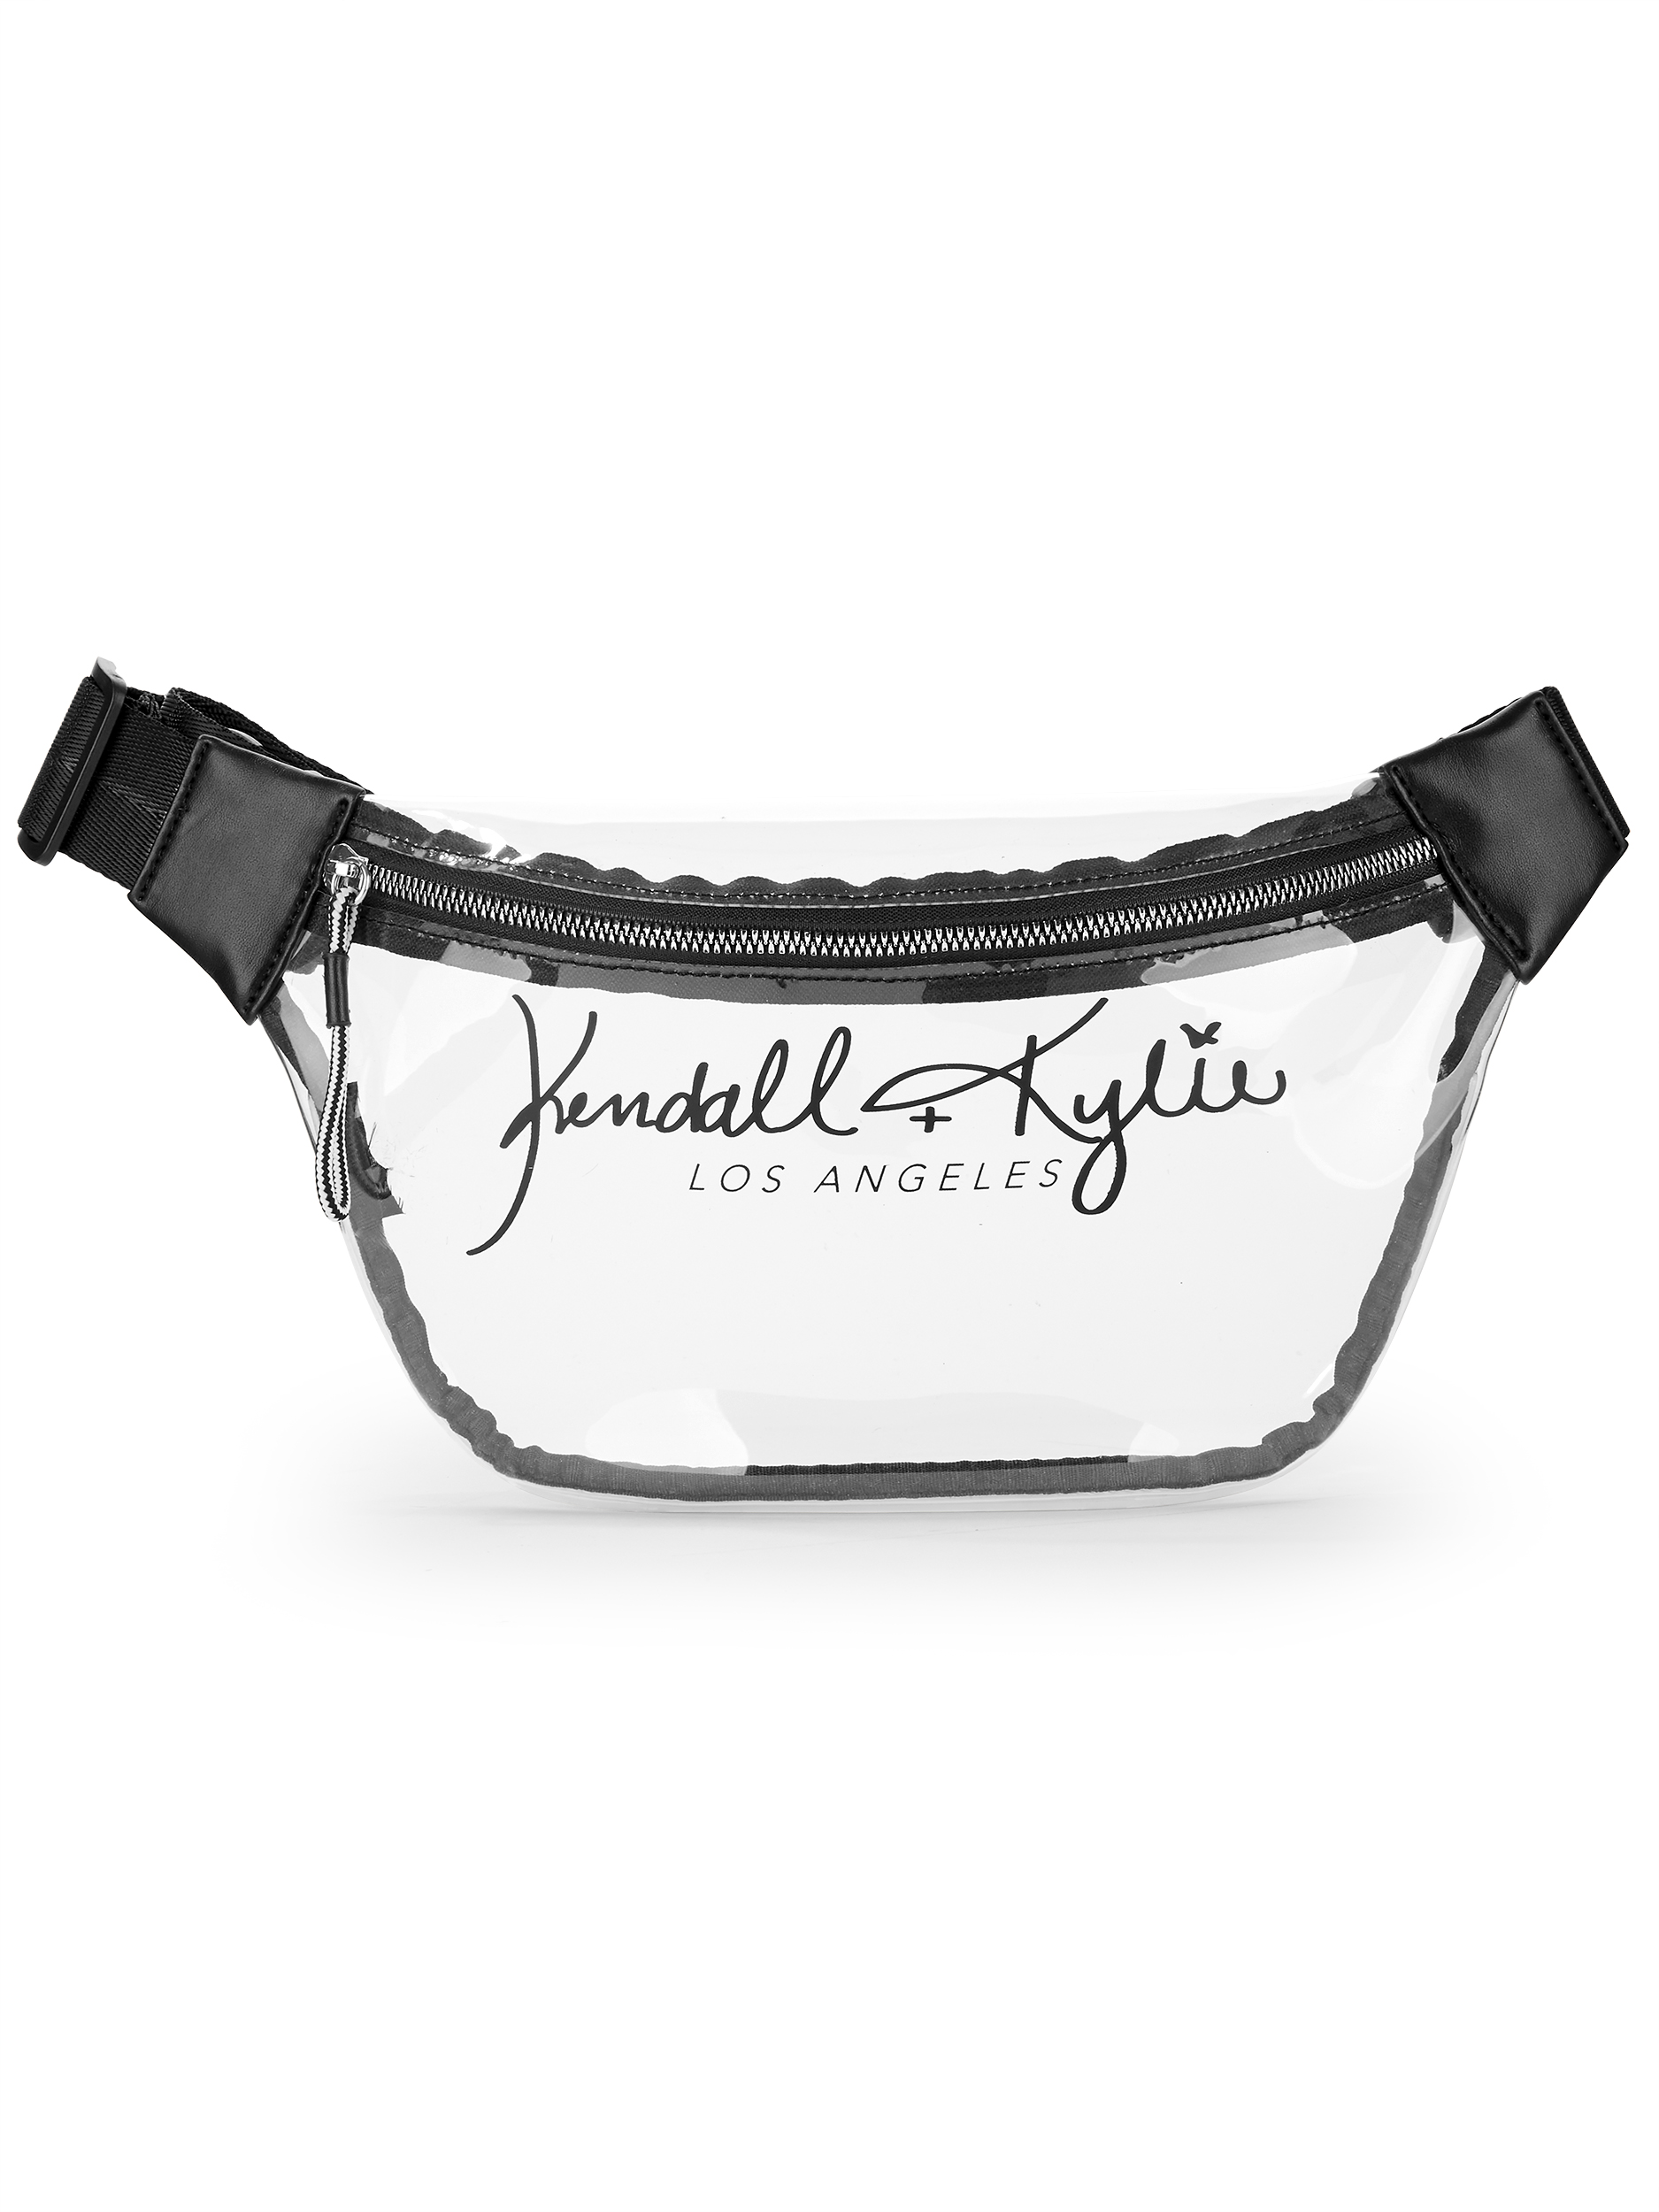 Kendall + Kylie for Walmart Clear Lucite Large Fanny Pack - image 1 of 5